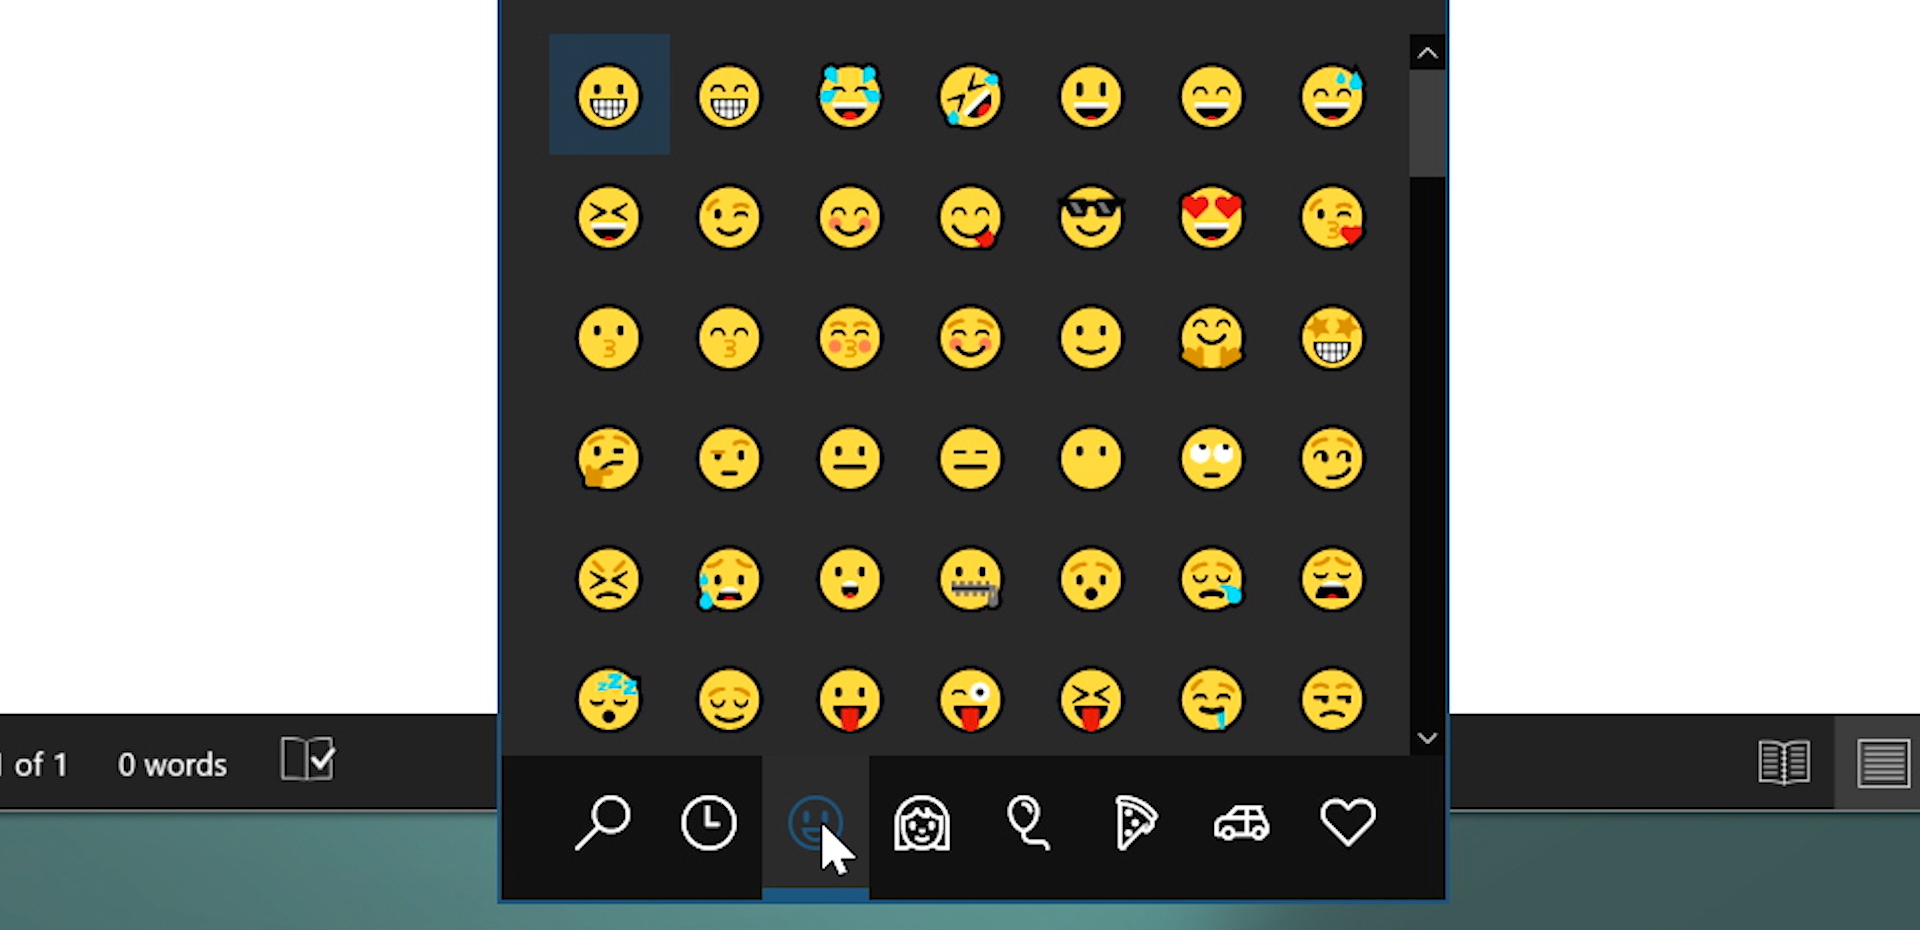 Windows 10 Tip Get Started With The Emoji Keyboard Shortcut Windows Experience Blog